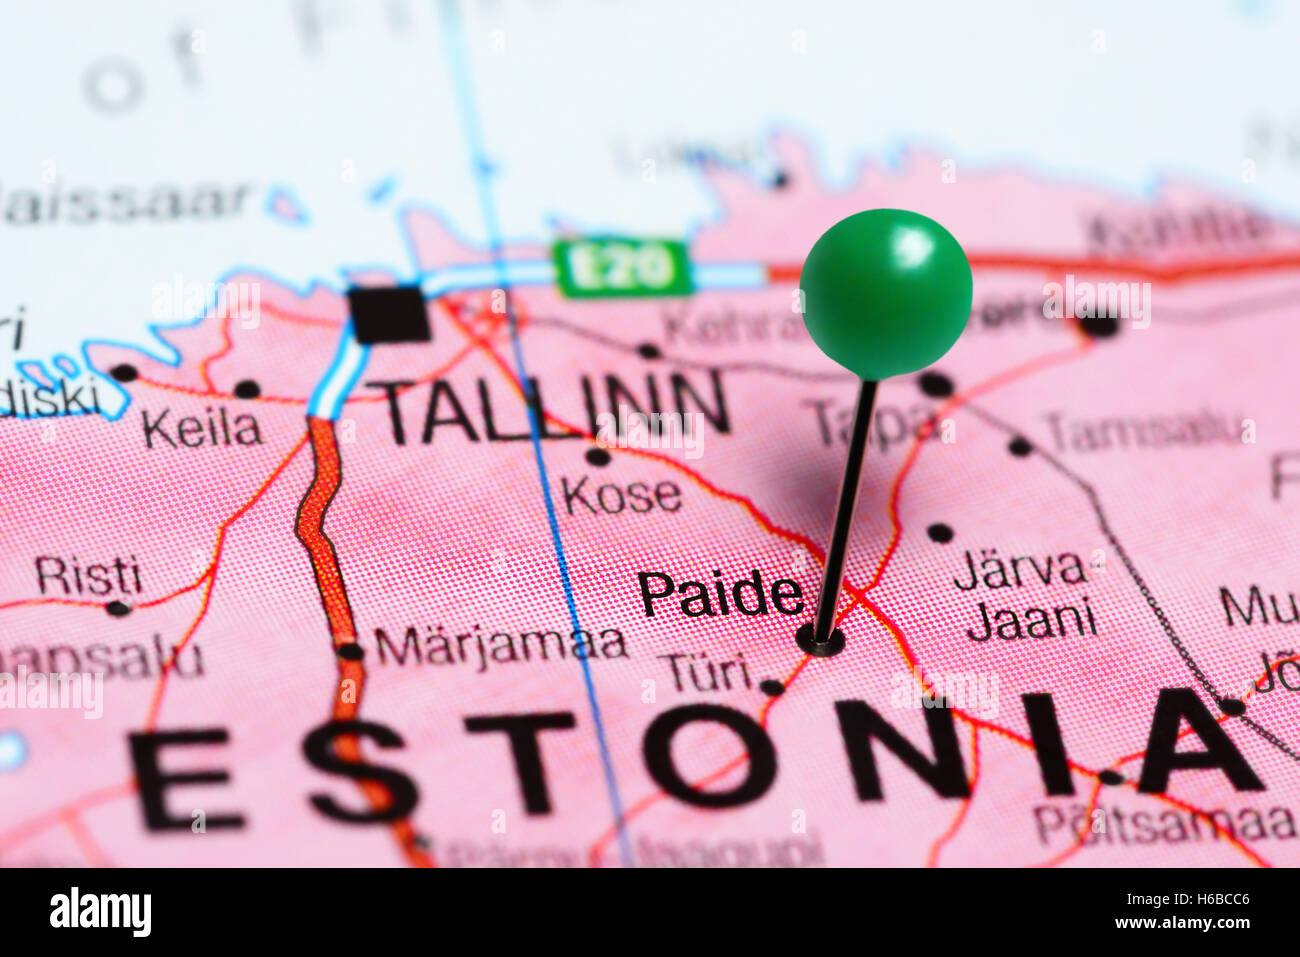 Paide pinned on a map of Estonia Stock Photo